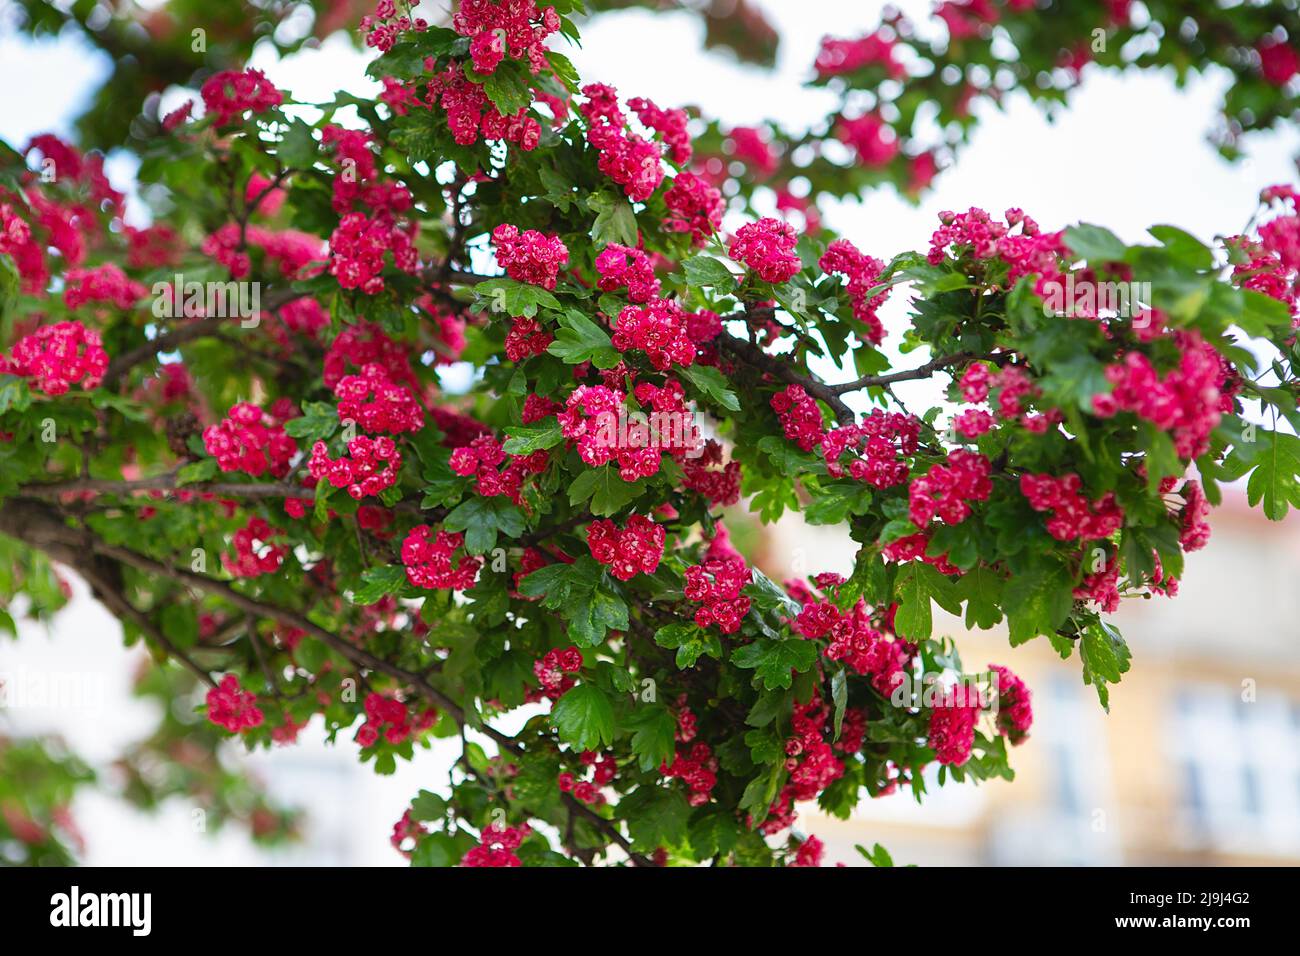 Amazing hawthorn blooms in the park. Tree branches with carmine-red flowers of Paul's Scarlet Hawthorn or Crataegus Laevigata. Inflorescences of a haw Stock Photo